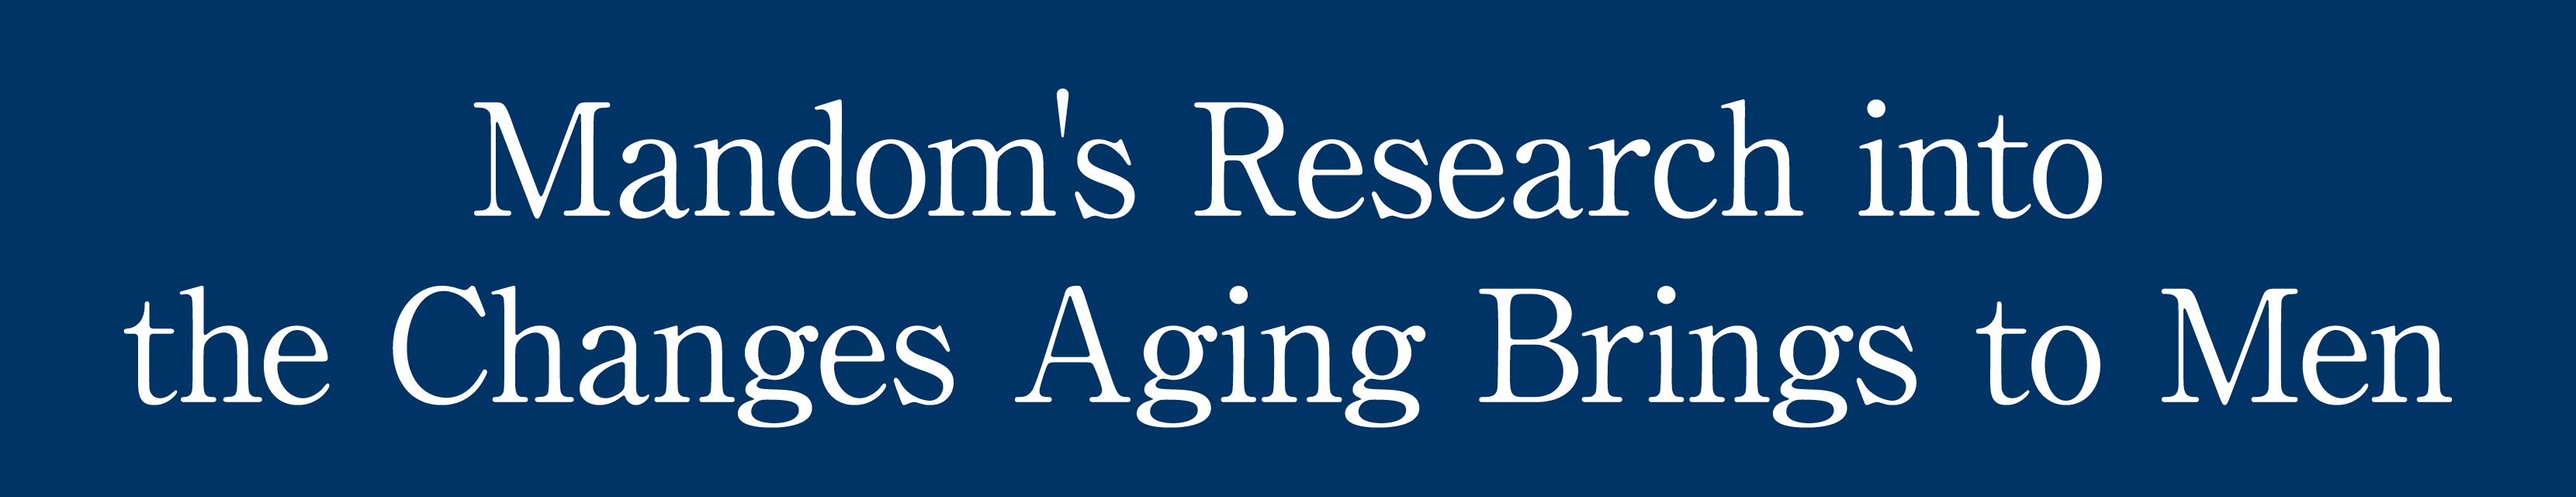 Mandom's Research into the Changes Aging Brings to Men